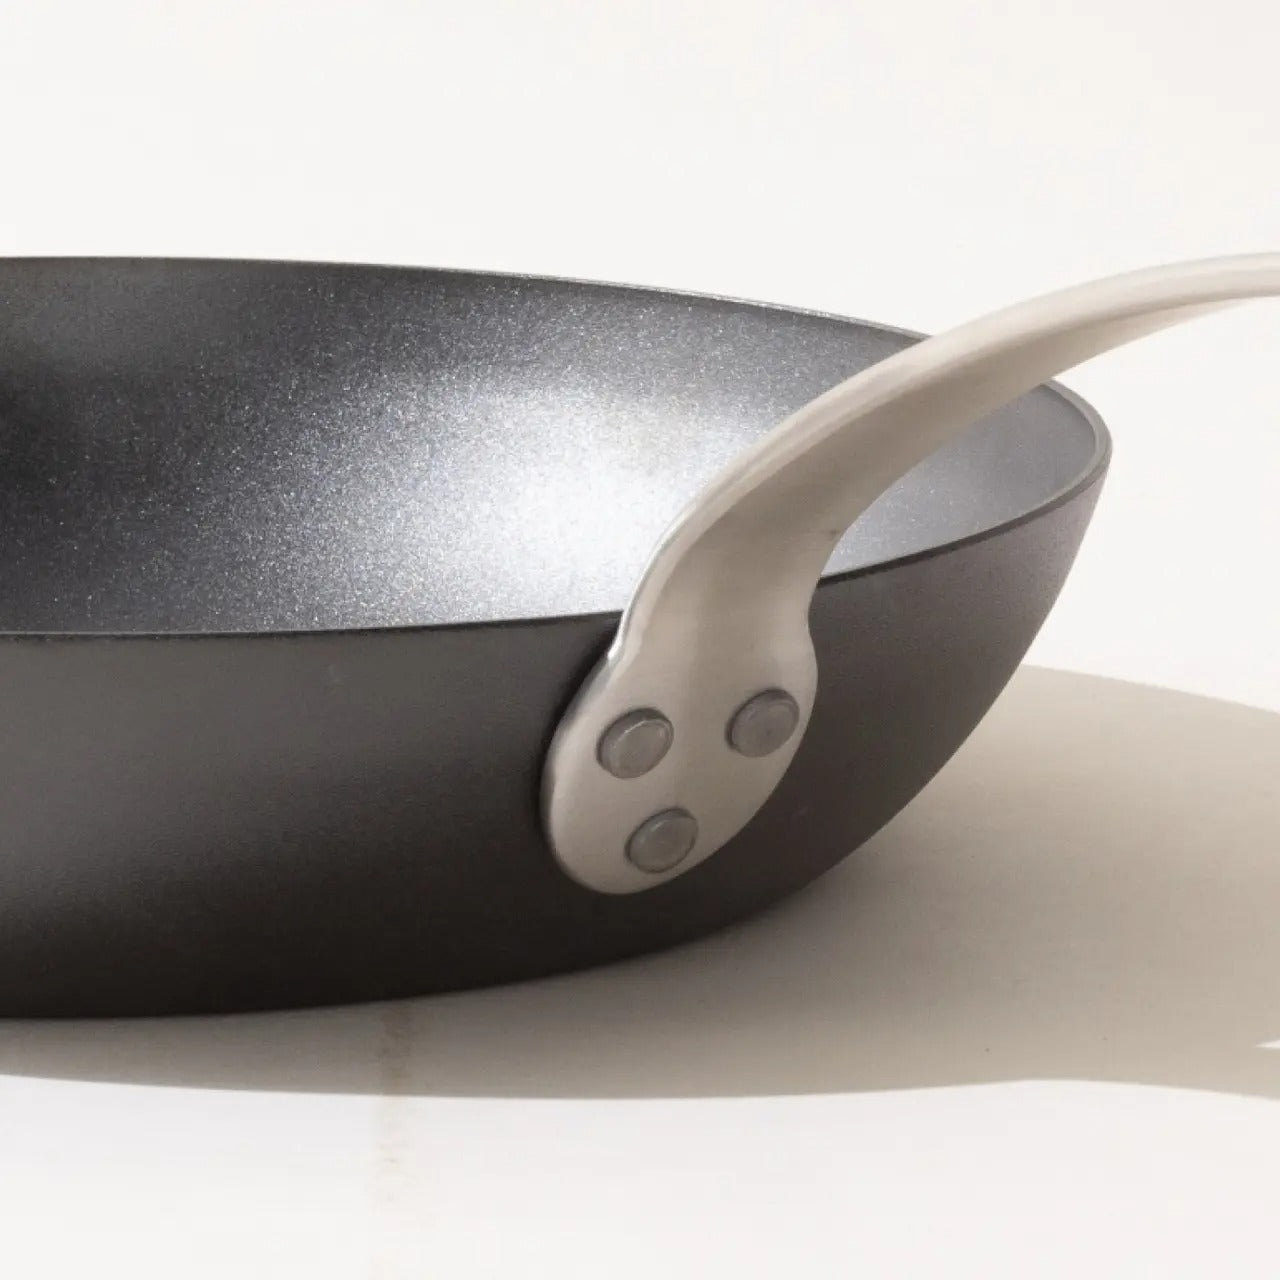 MADE IN Blue Carbon Steel Fry Pans - 10", 12"